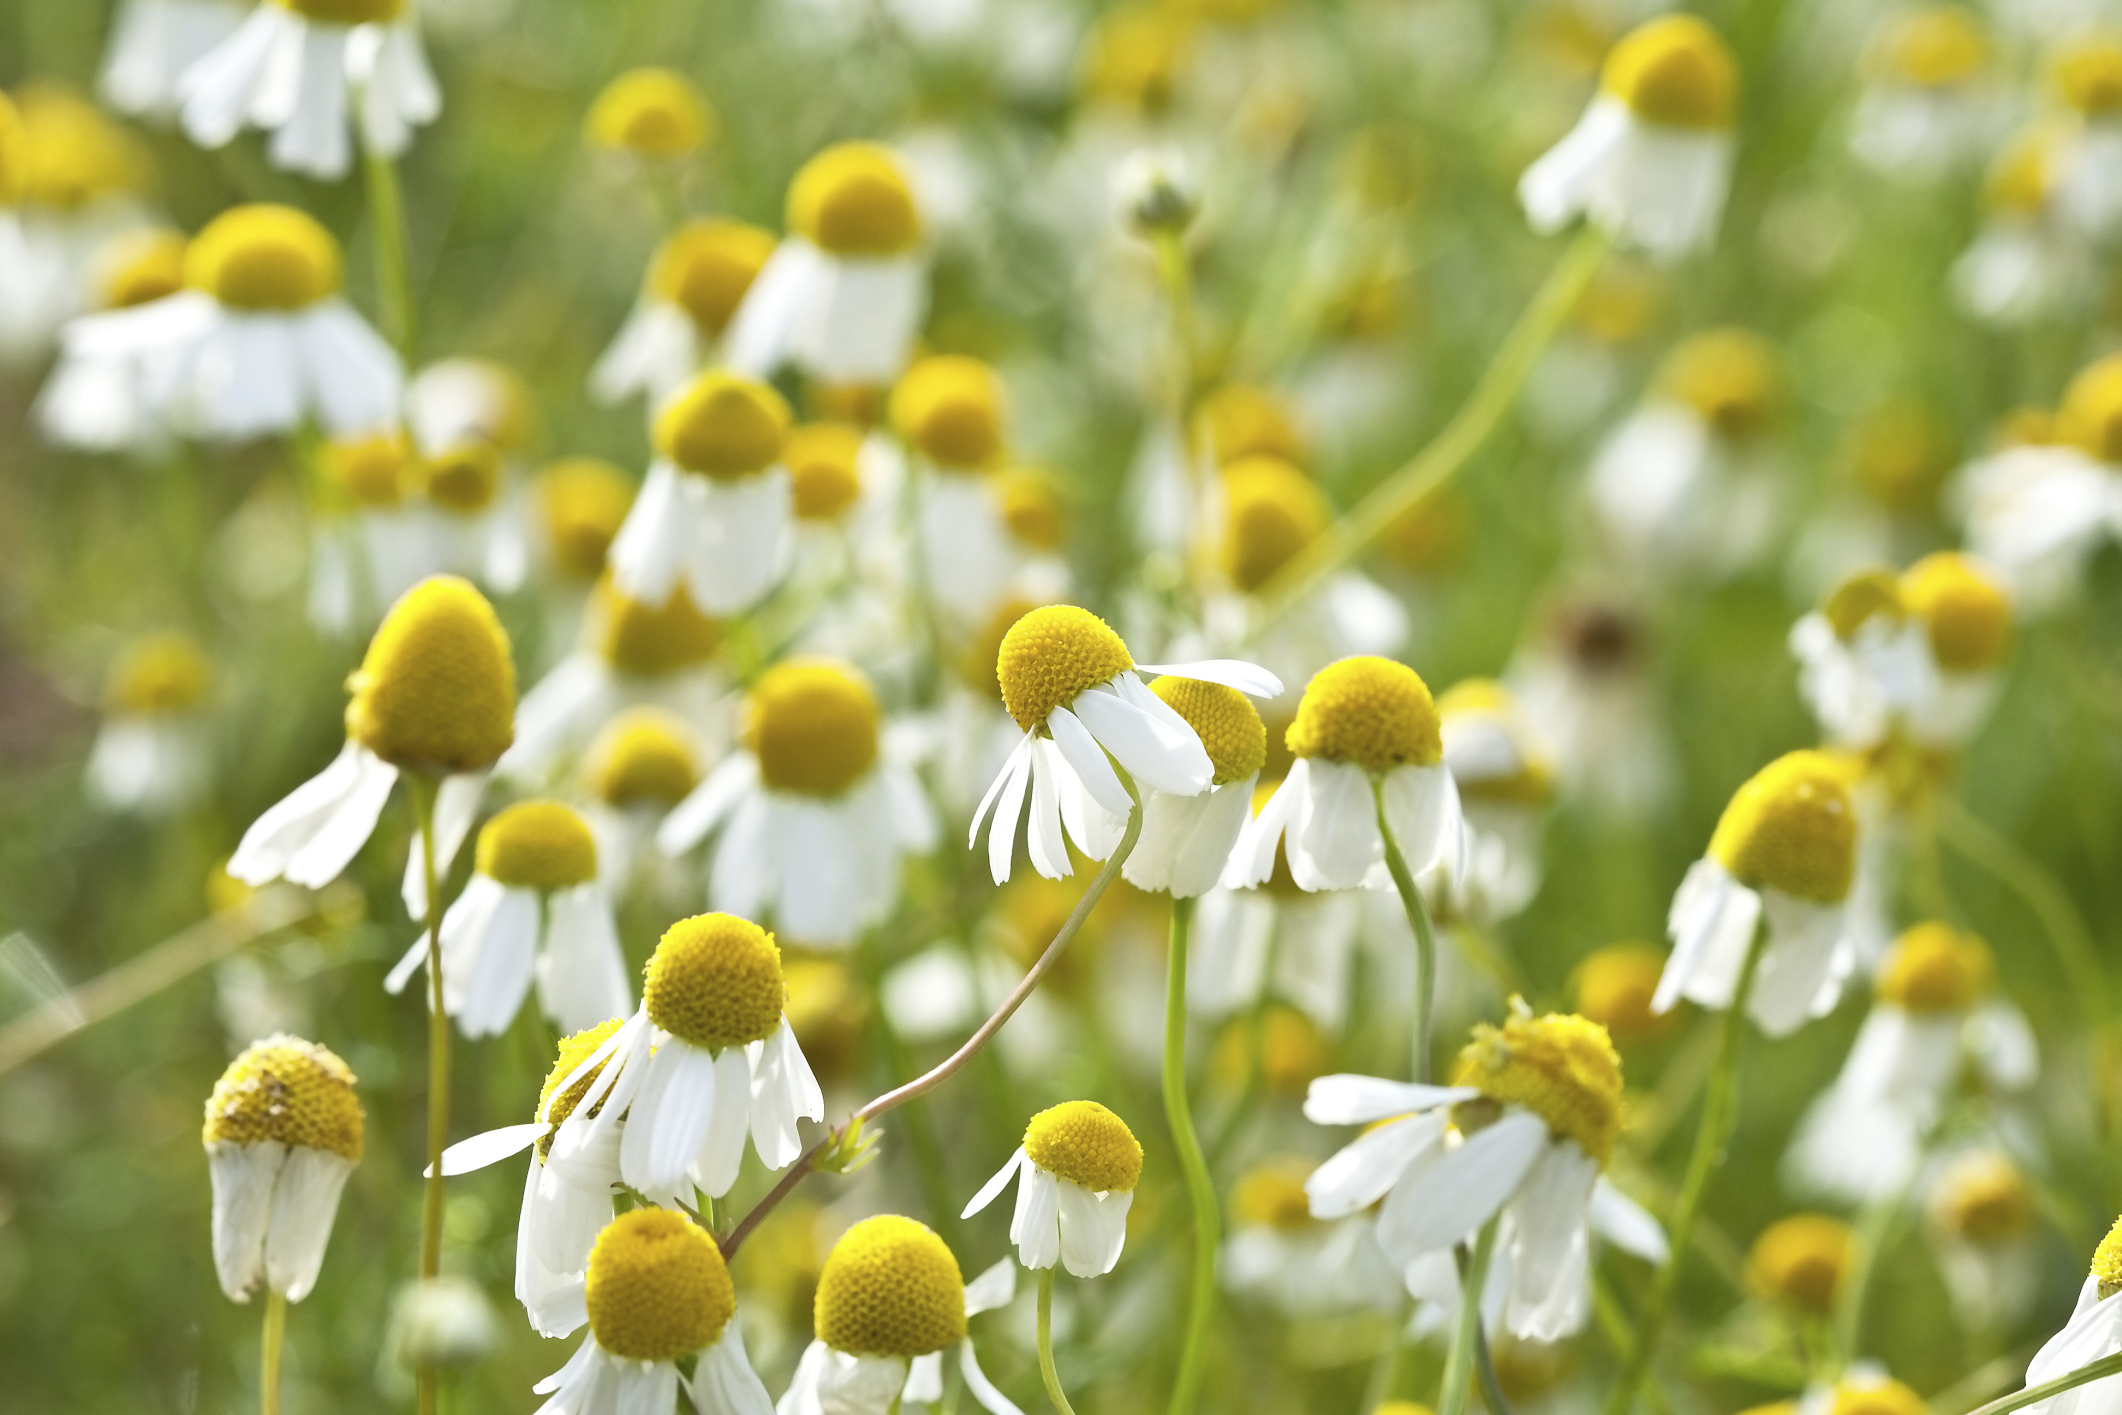 How to Make Tea With Chamomile Flowers | LIVESTRONG.COM